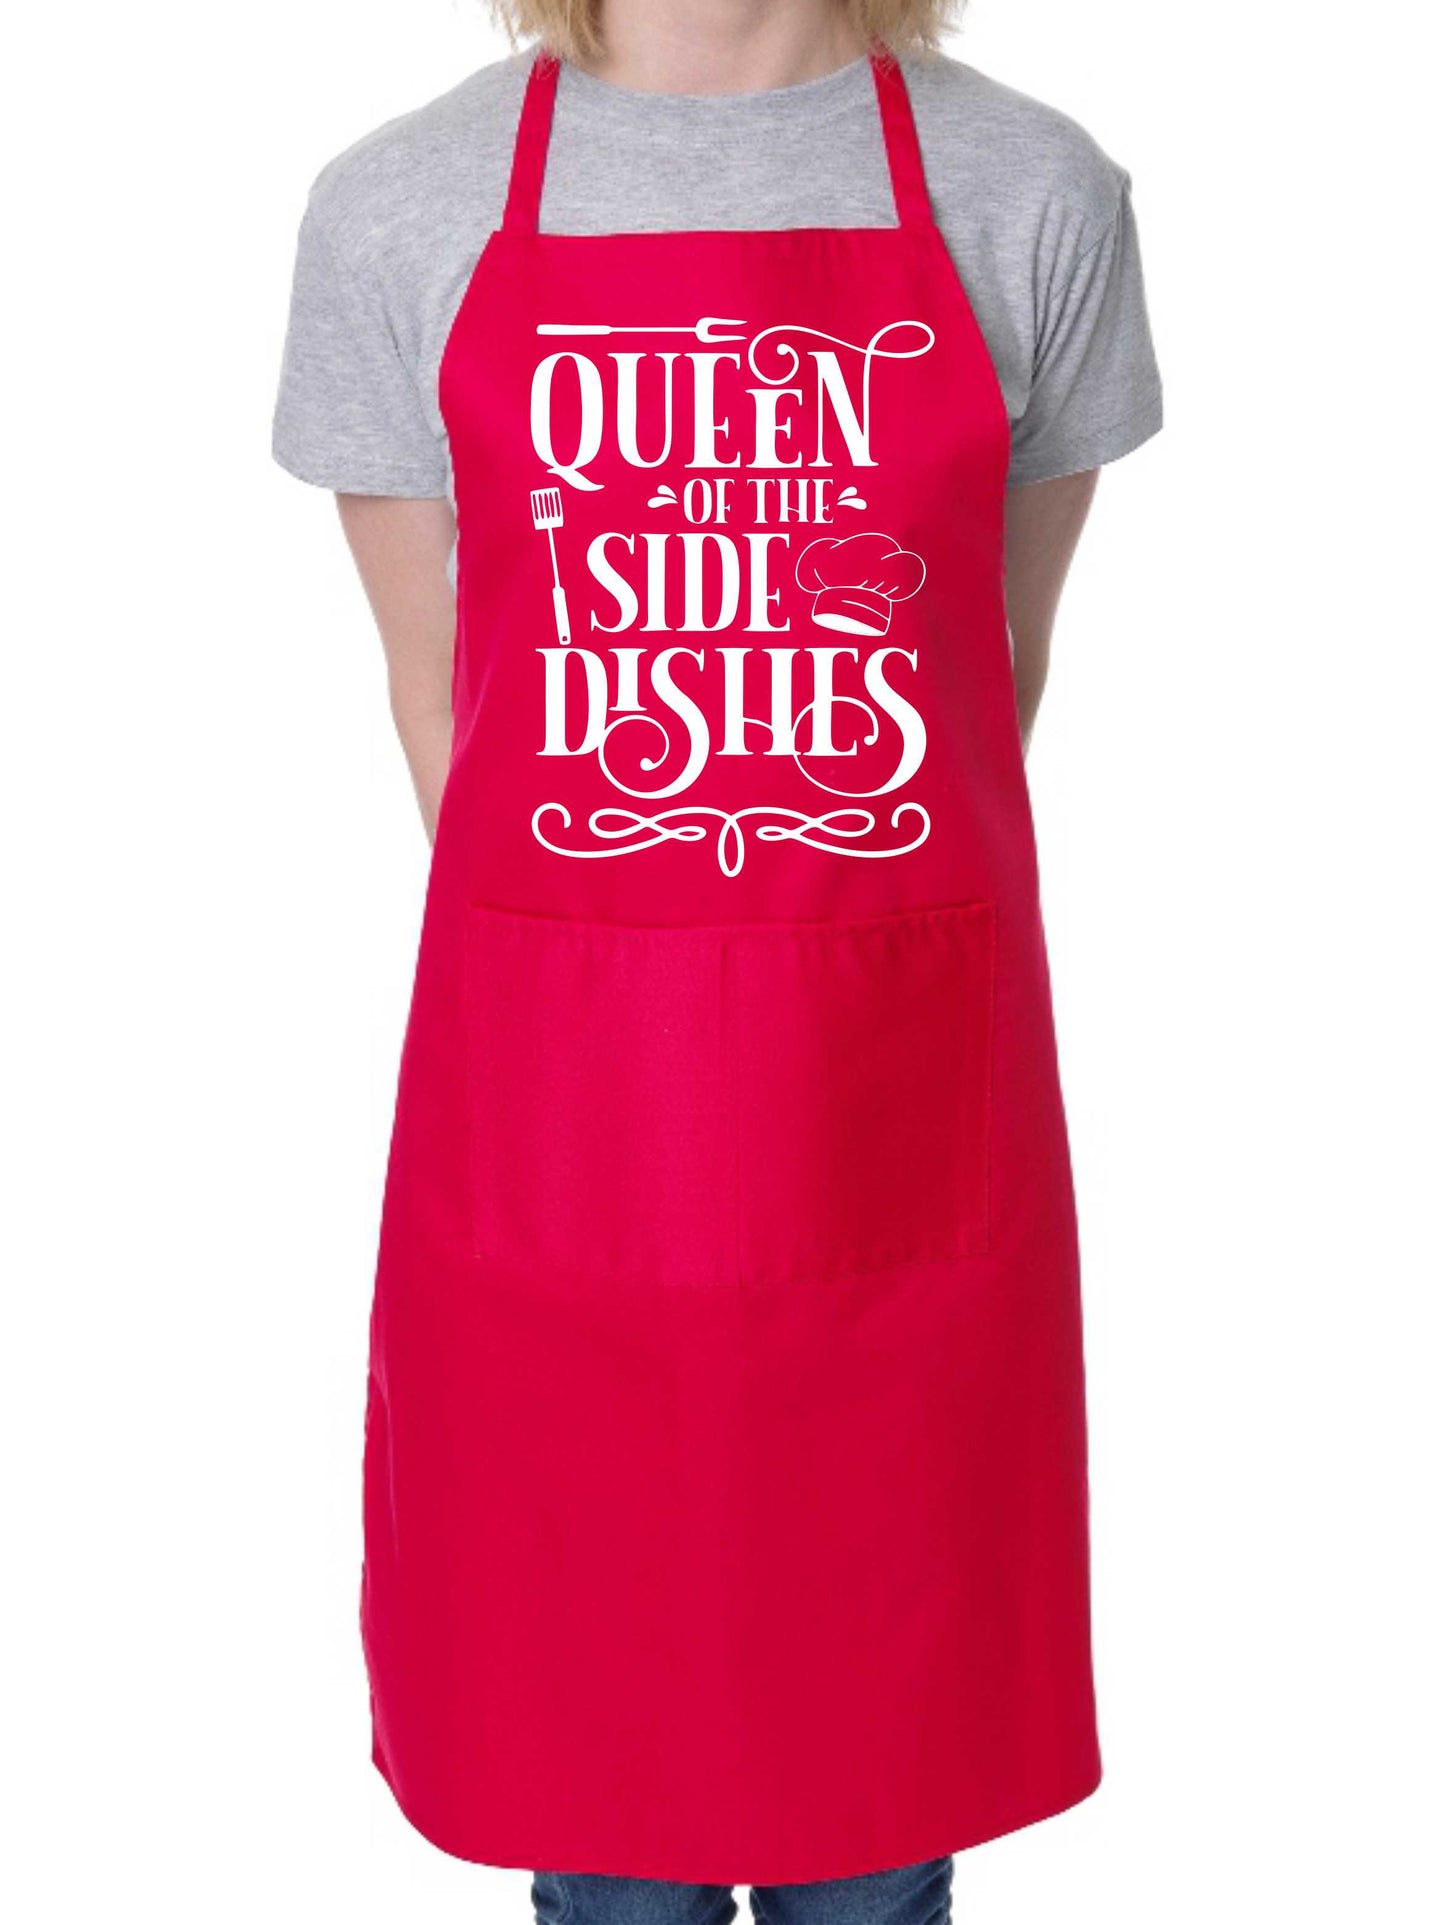 Queen Of Side Dishes Ladies Funny Apron Funny Birthday Gift Cooking Baking BBQ